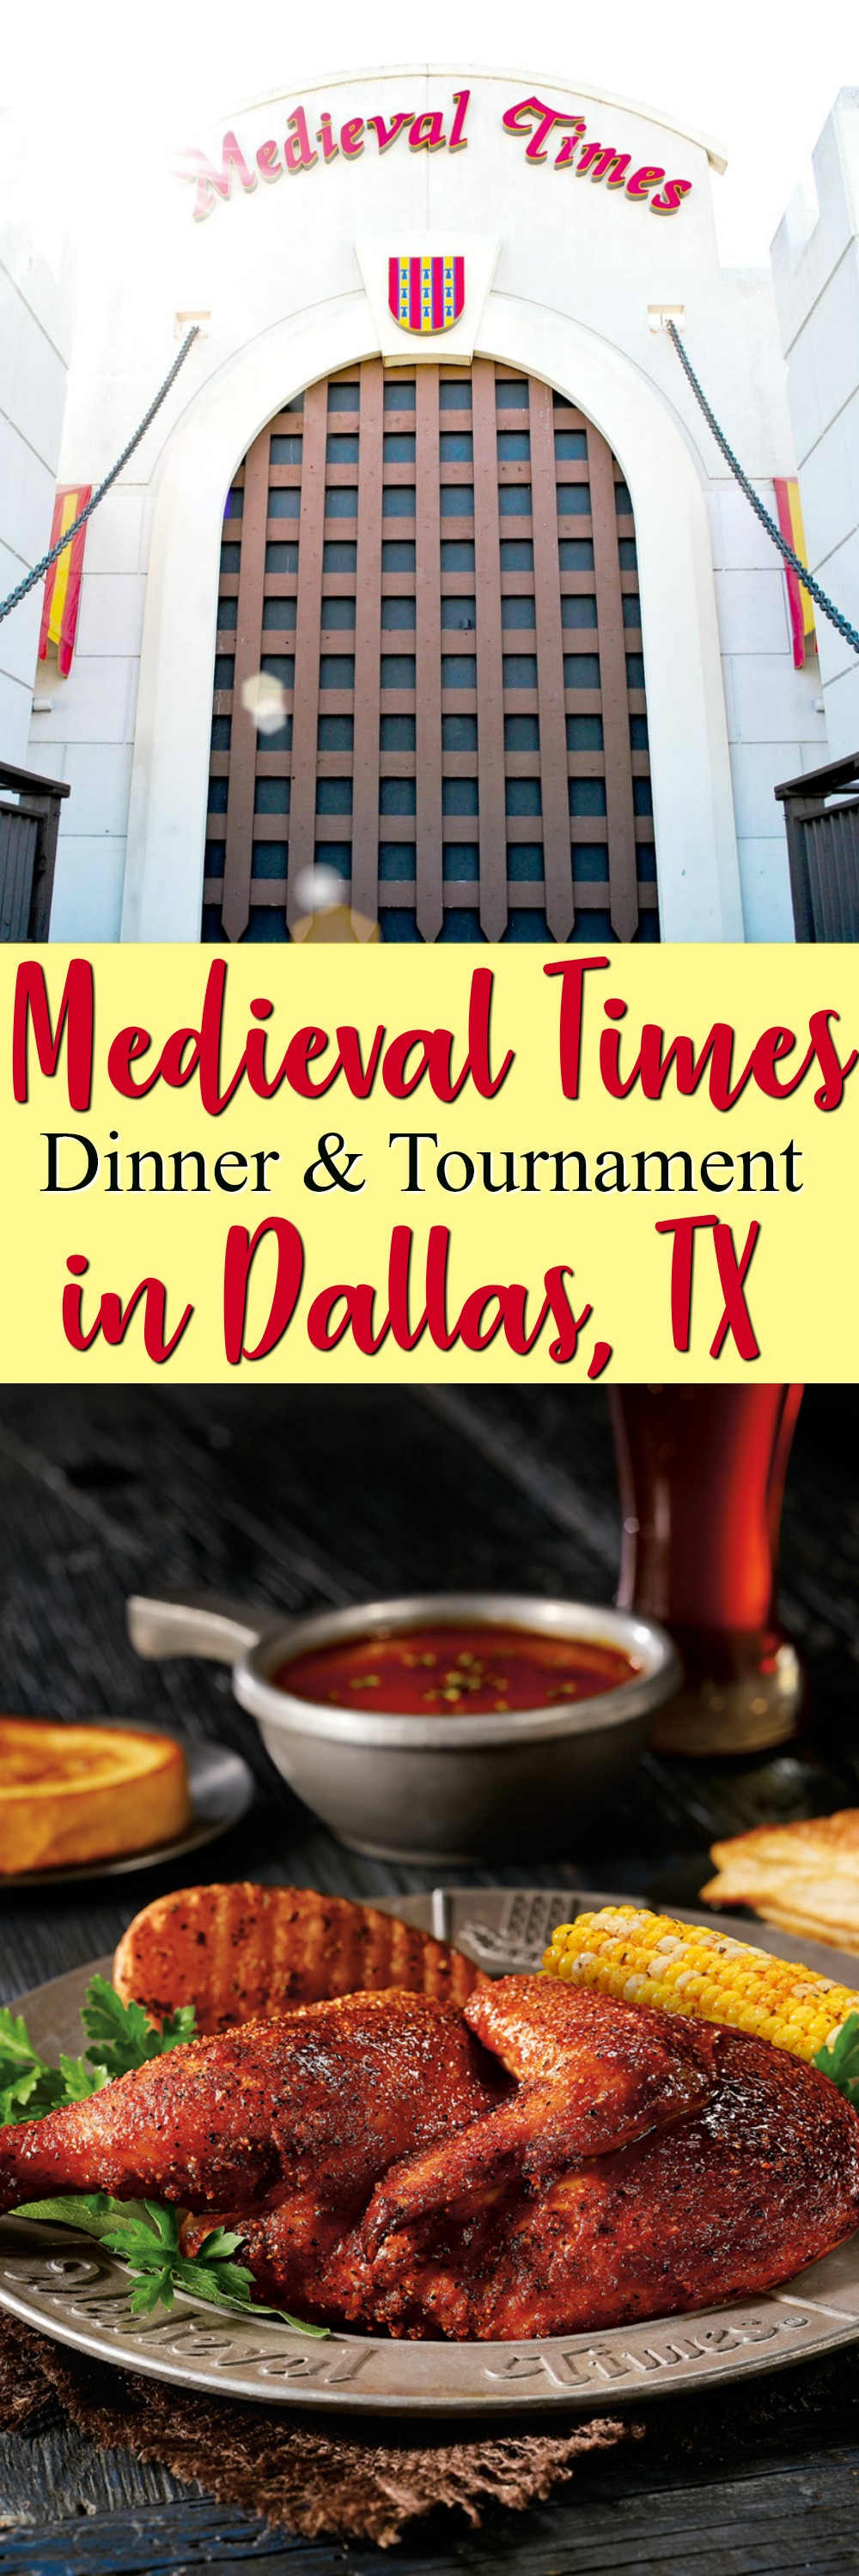 Traveling to Dallas, TX? Make time for dinner and at show at Medieval Times! | SensiblySara.com